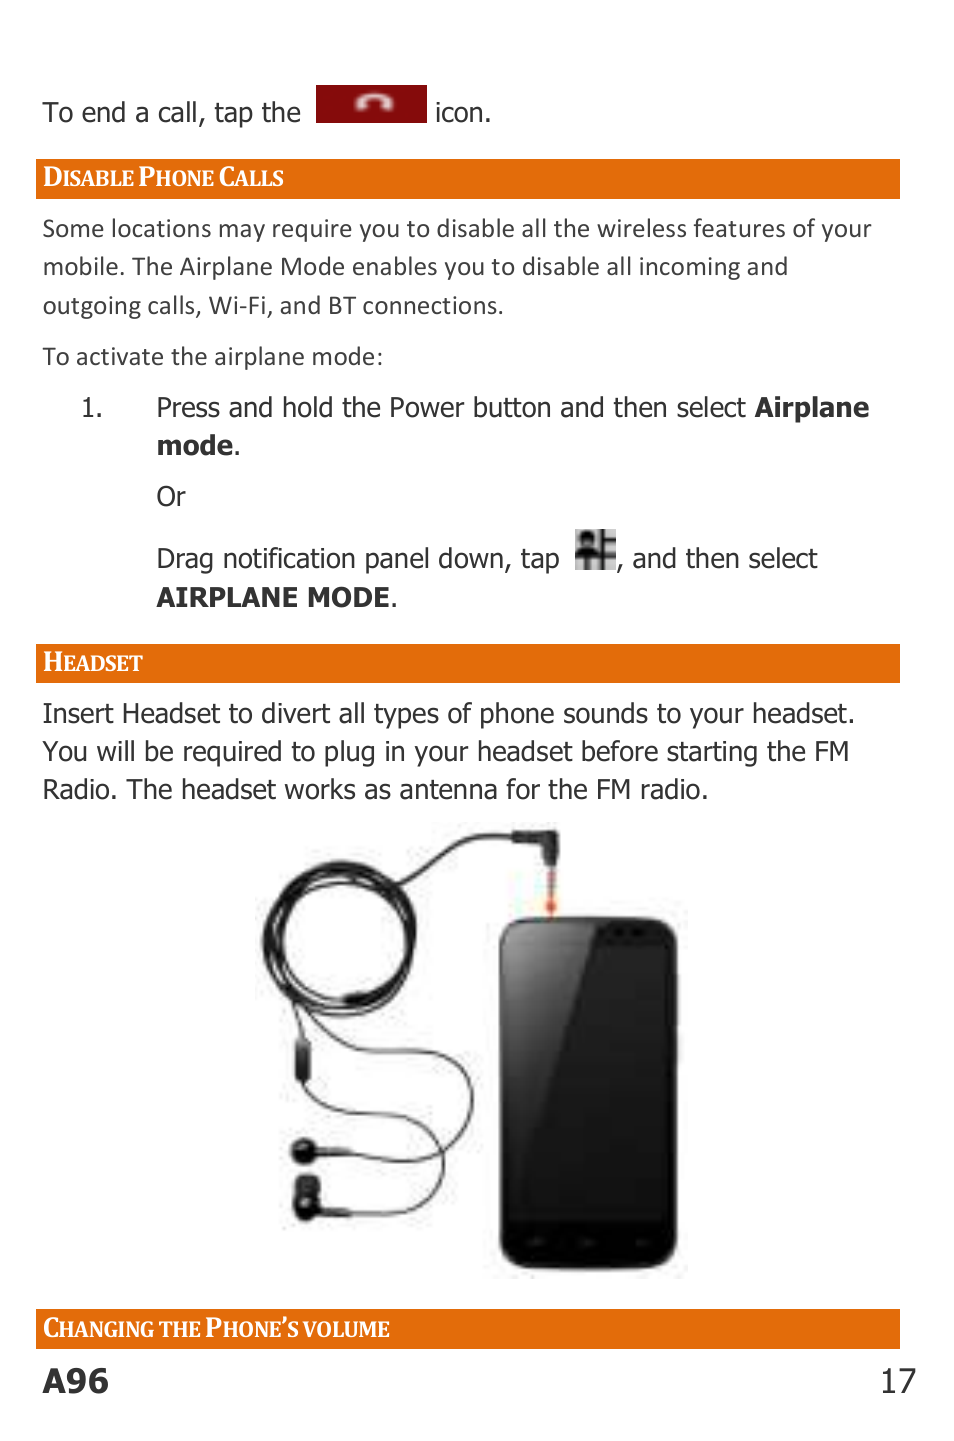 Isable, Hone, Alls | Eadset, Hanging the, S volume, A96 17 | Micromax Canvas Power User Manual | Page 17 / 56